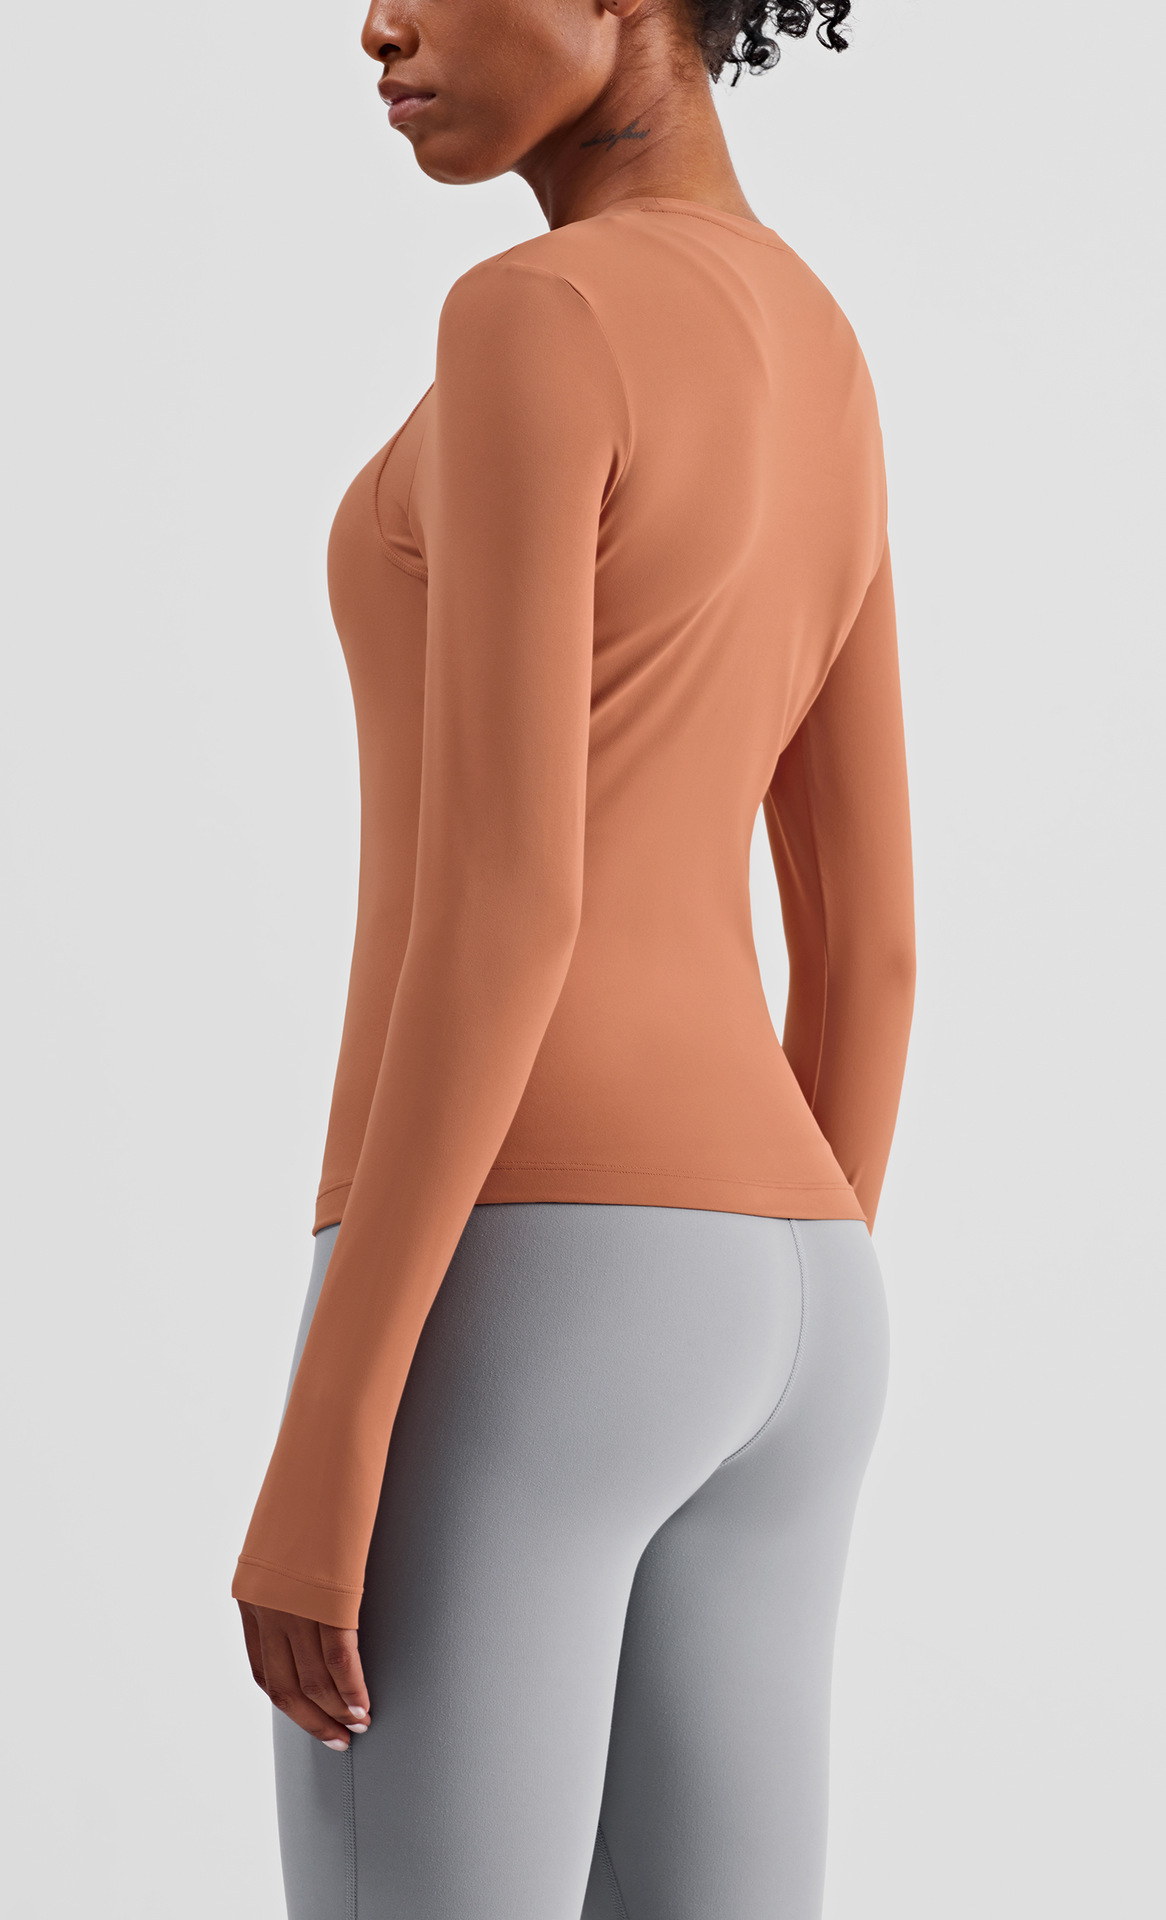 Autumn and winter fitness and yoga clothing (8)3k5